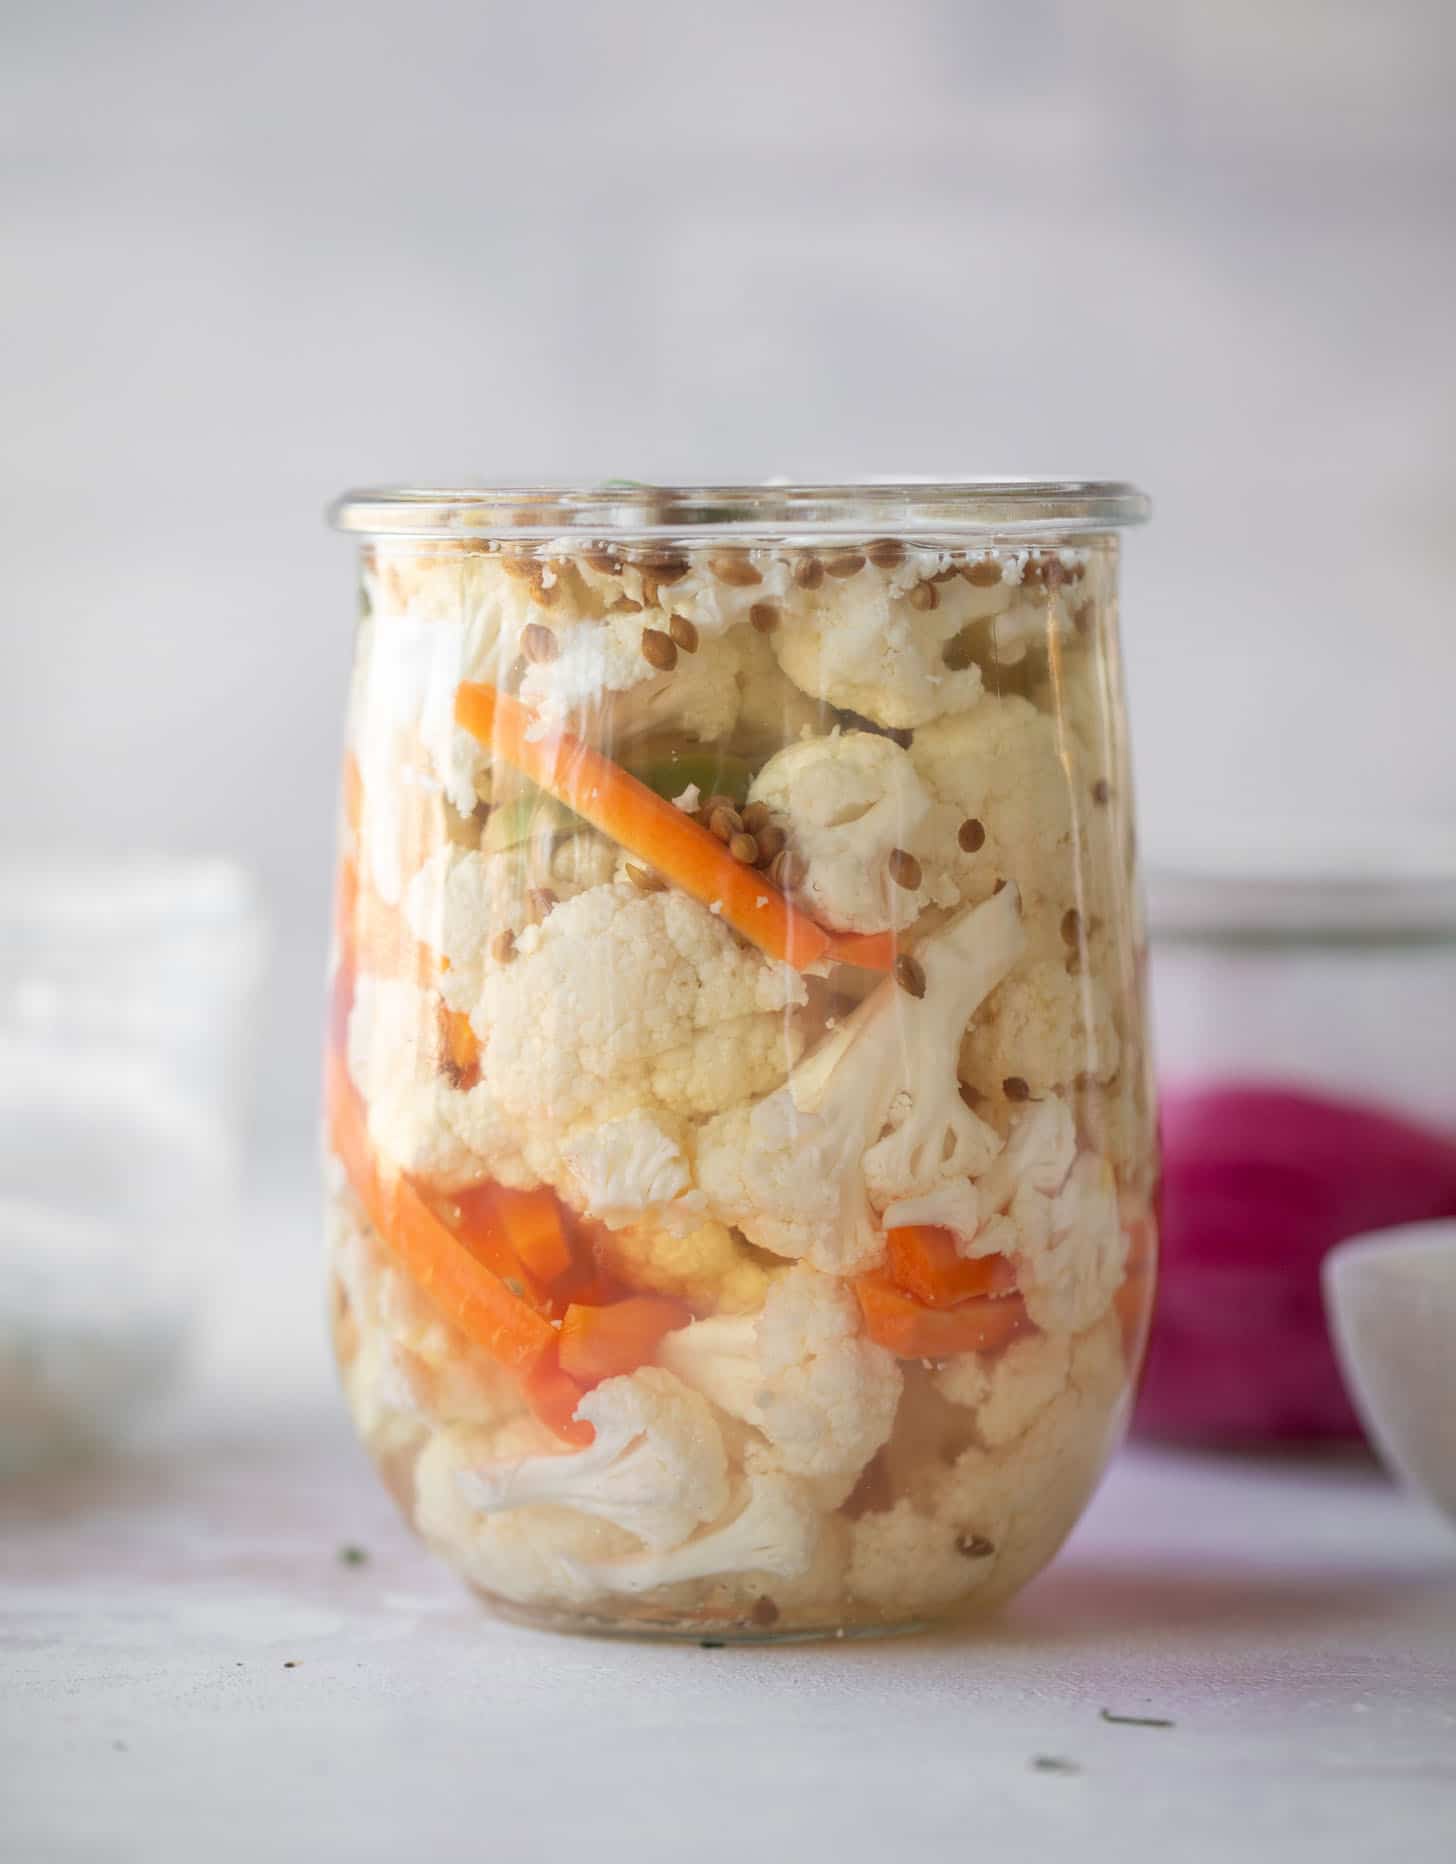 pickled cauliflower and carrots